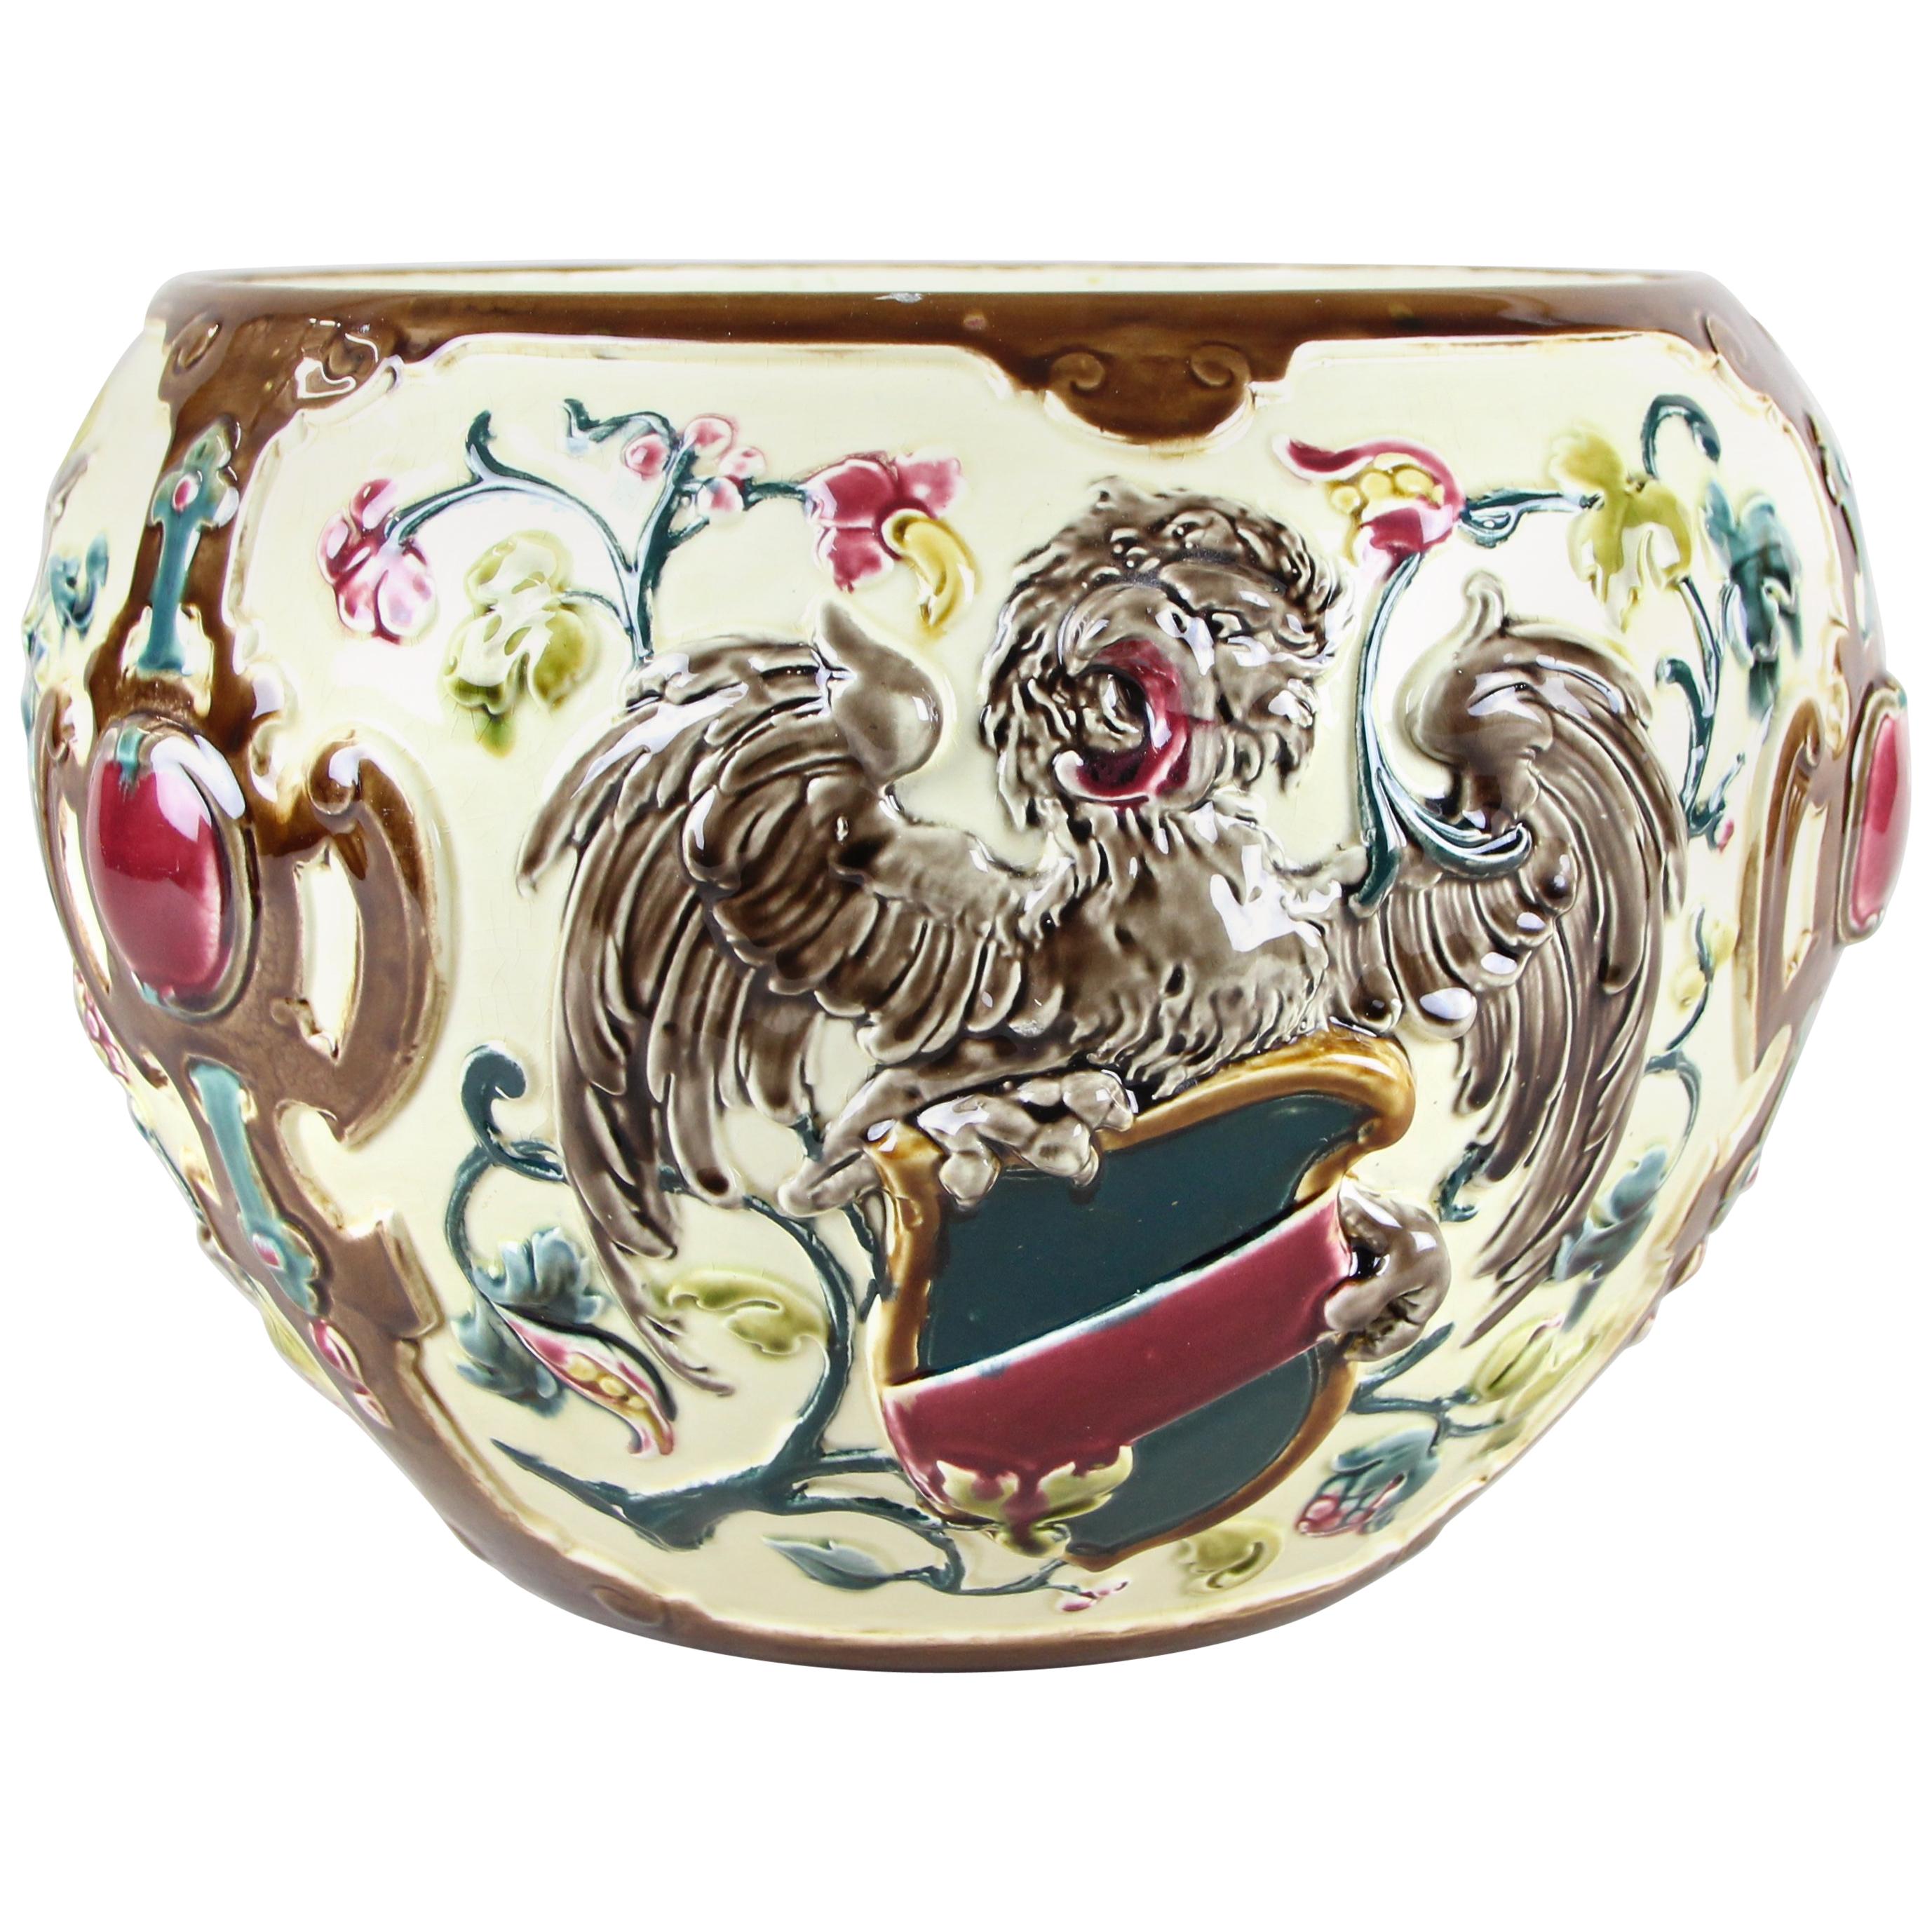 Large Majolica cachepot by Rudolf Ditmar Znaim from the so-called 